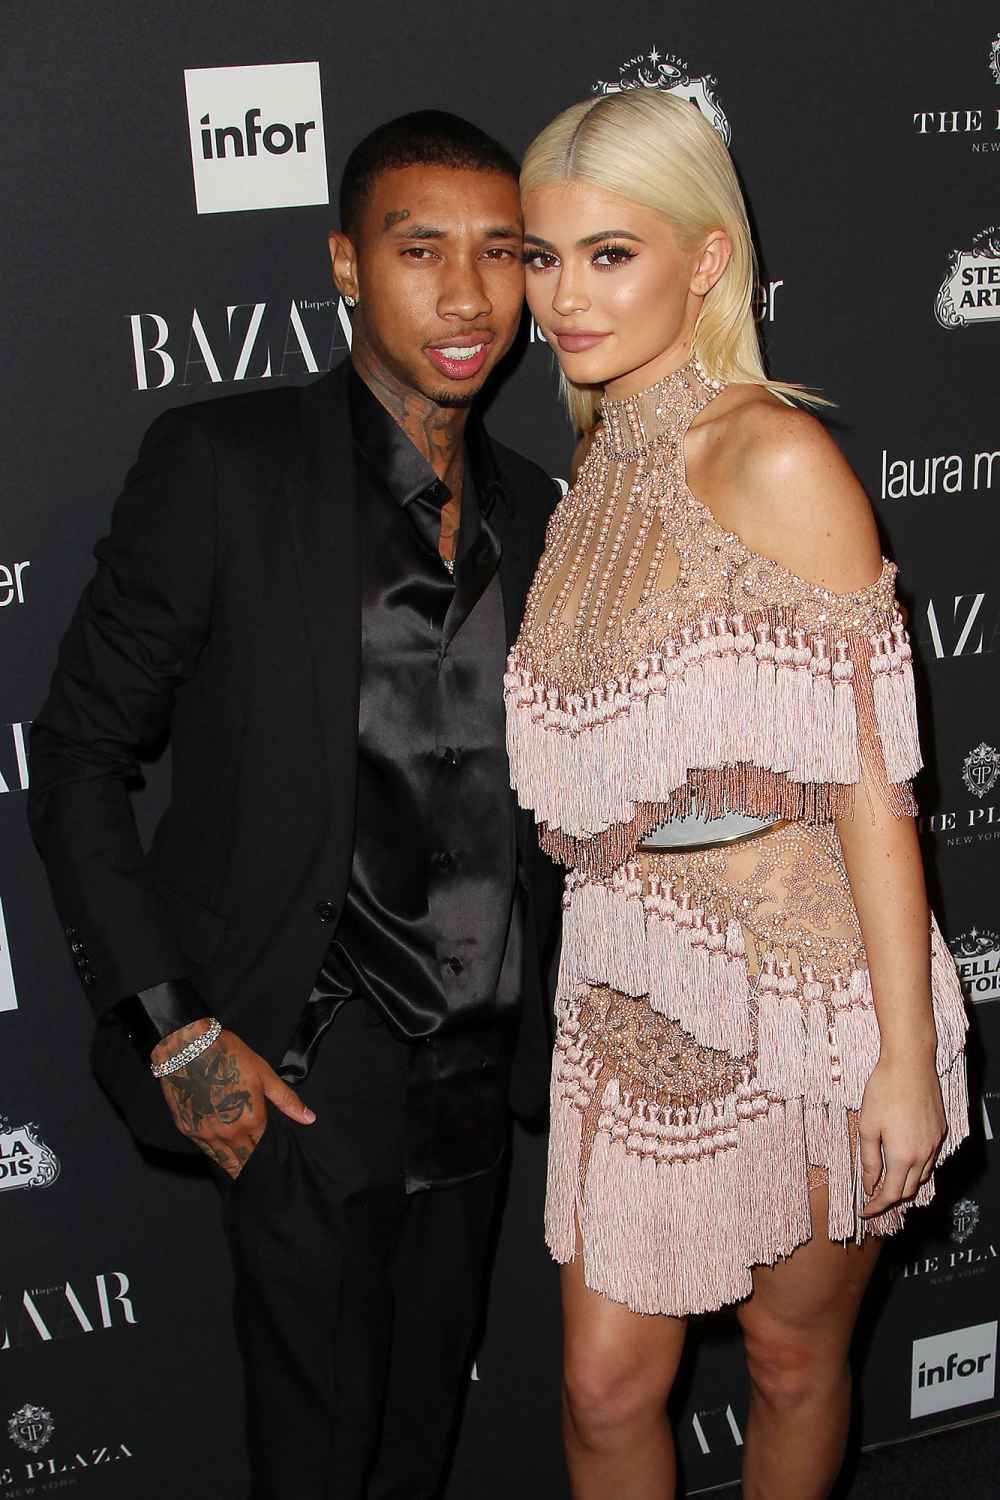 Kylie Jenner Fires Back at Claim She and Her Friends Bullied Tyga Music Video Costar